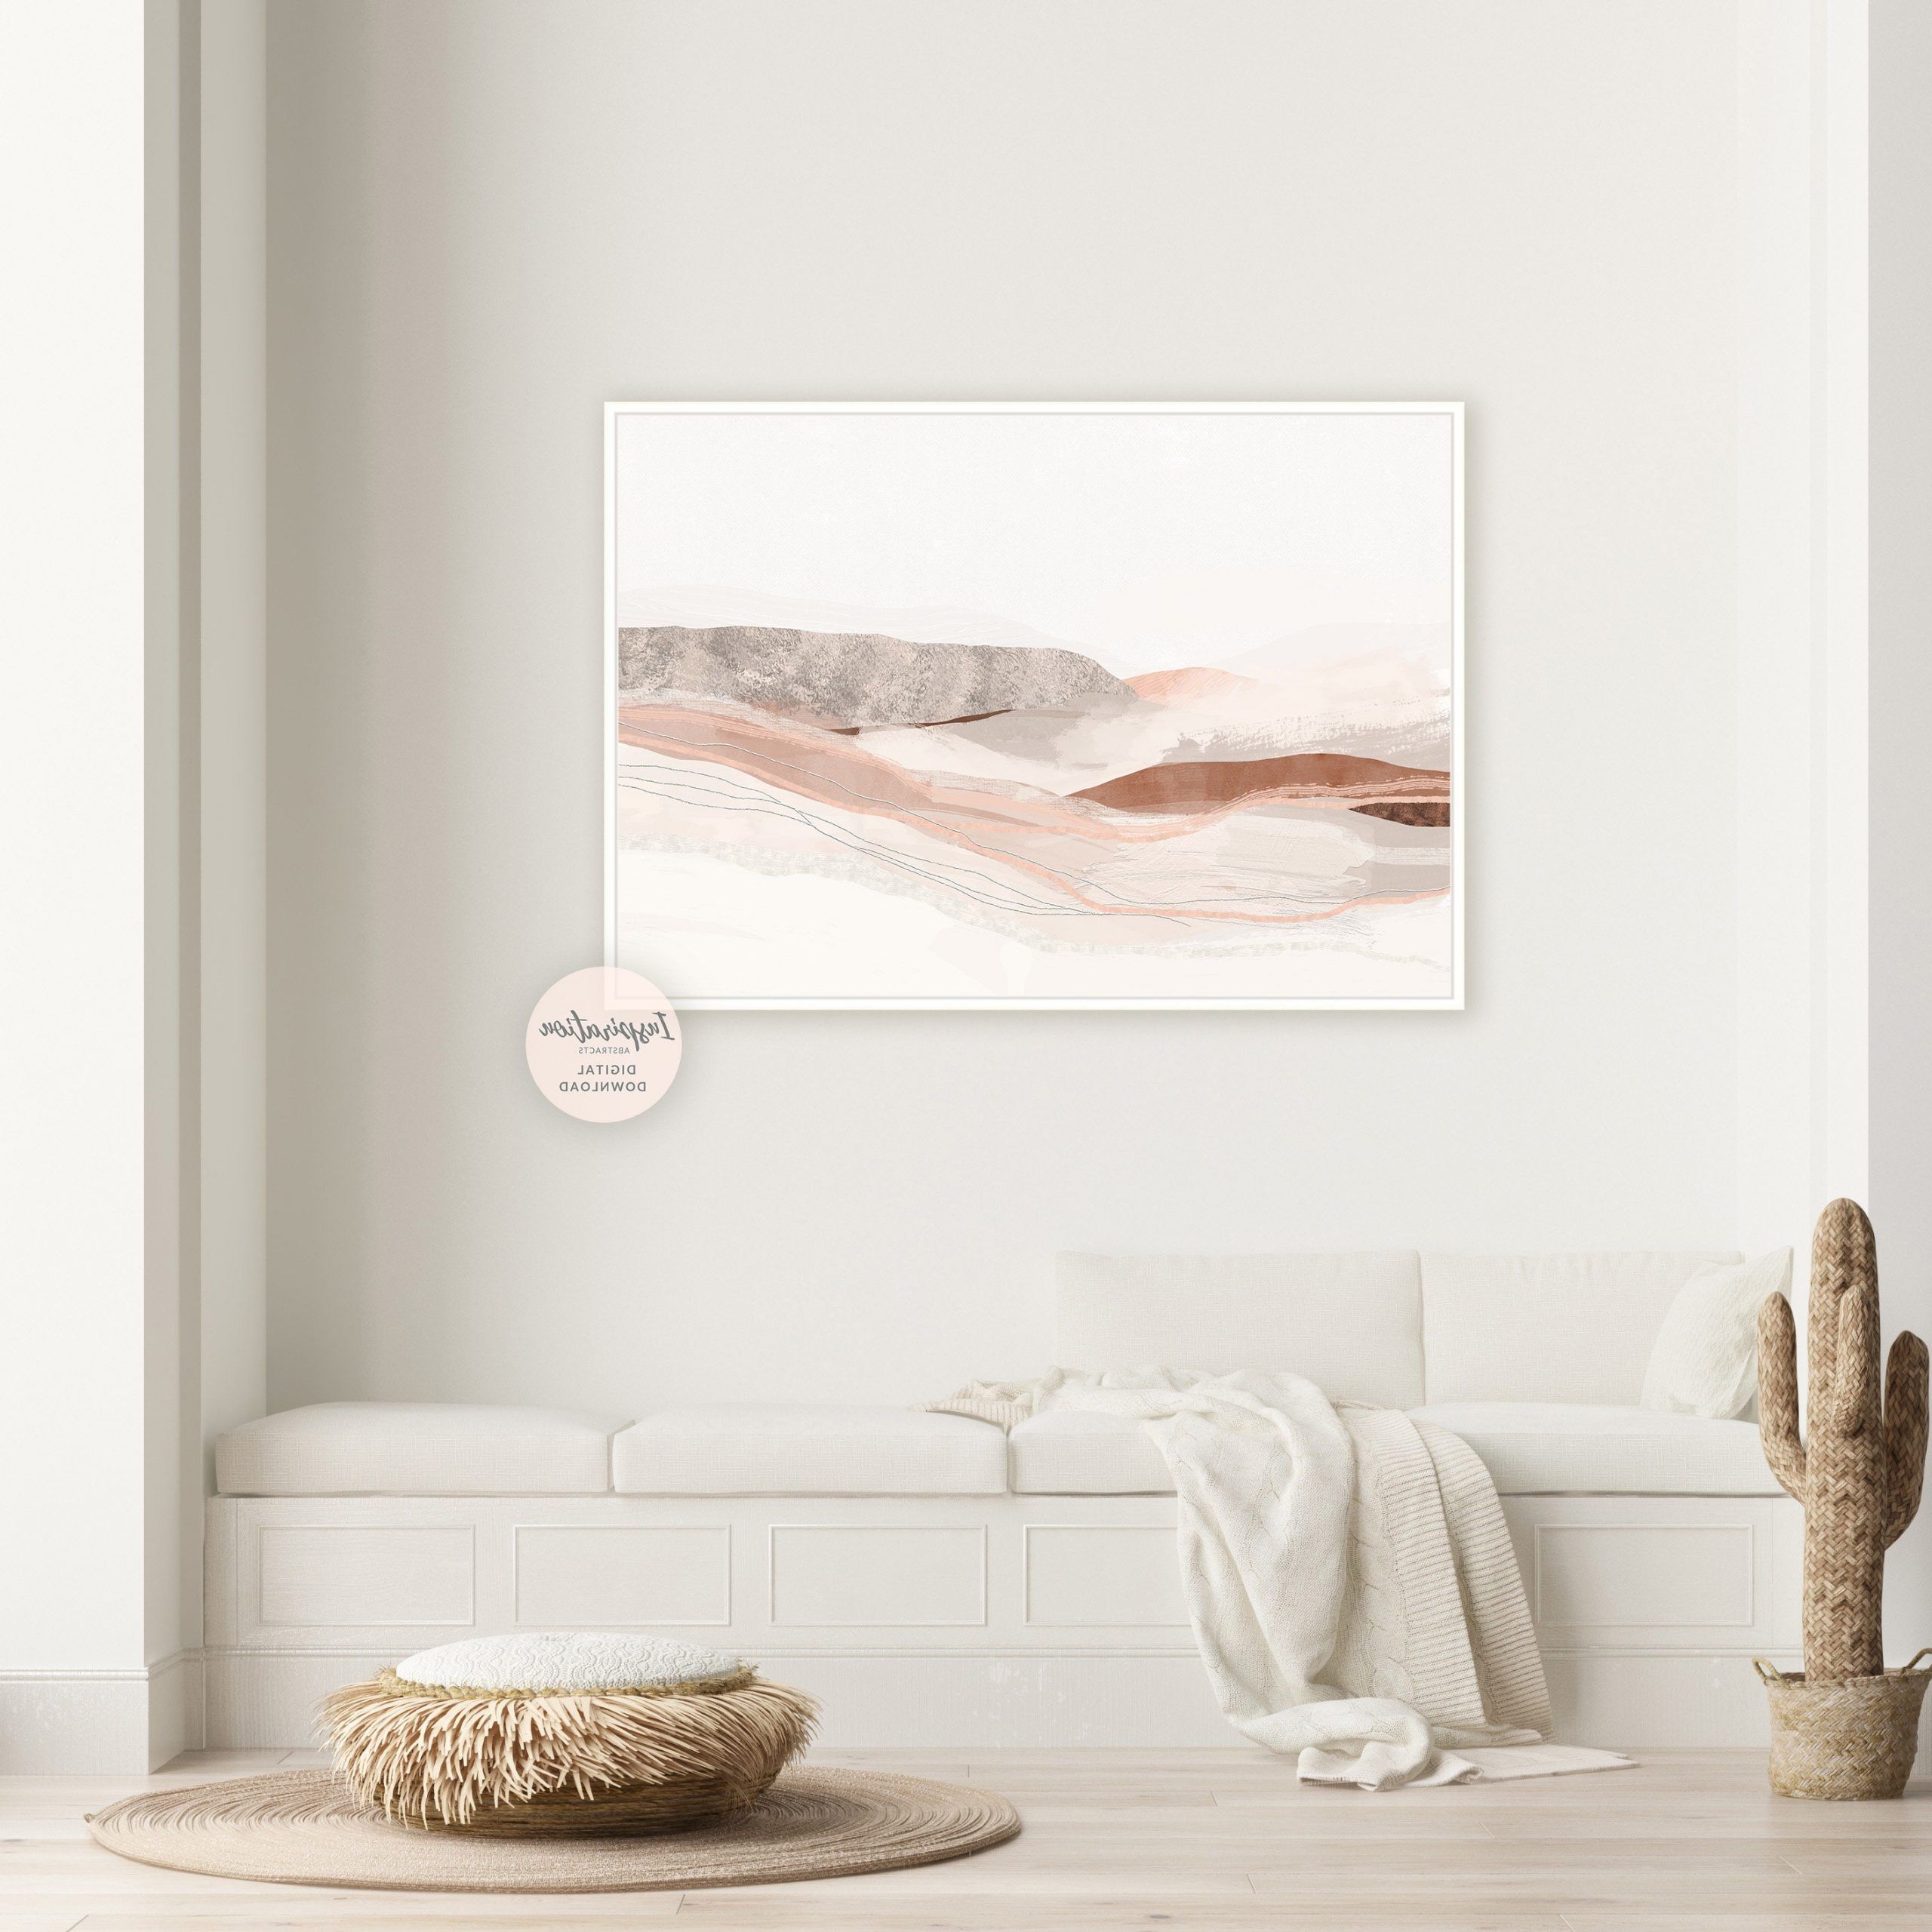 Most Popular Earth Wall Art Throughout Printable Landscape Painting, Earth Tone Print, Minimal Abstract Art (View 6 of 15)